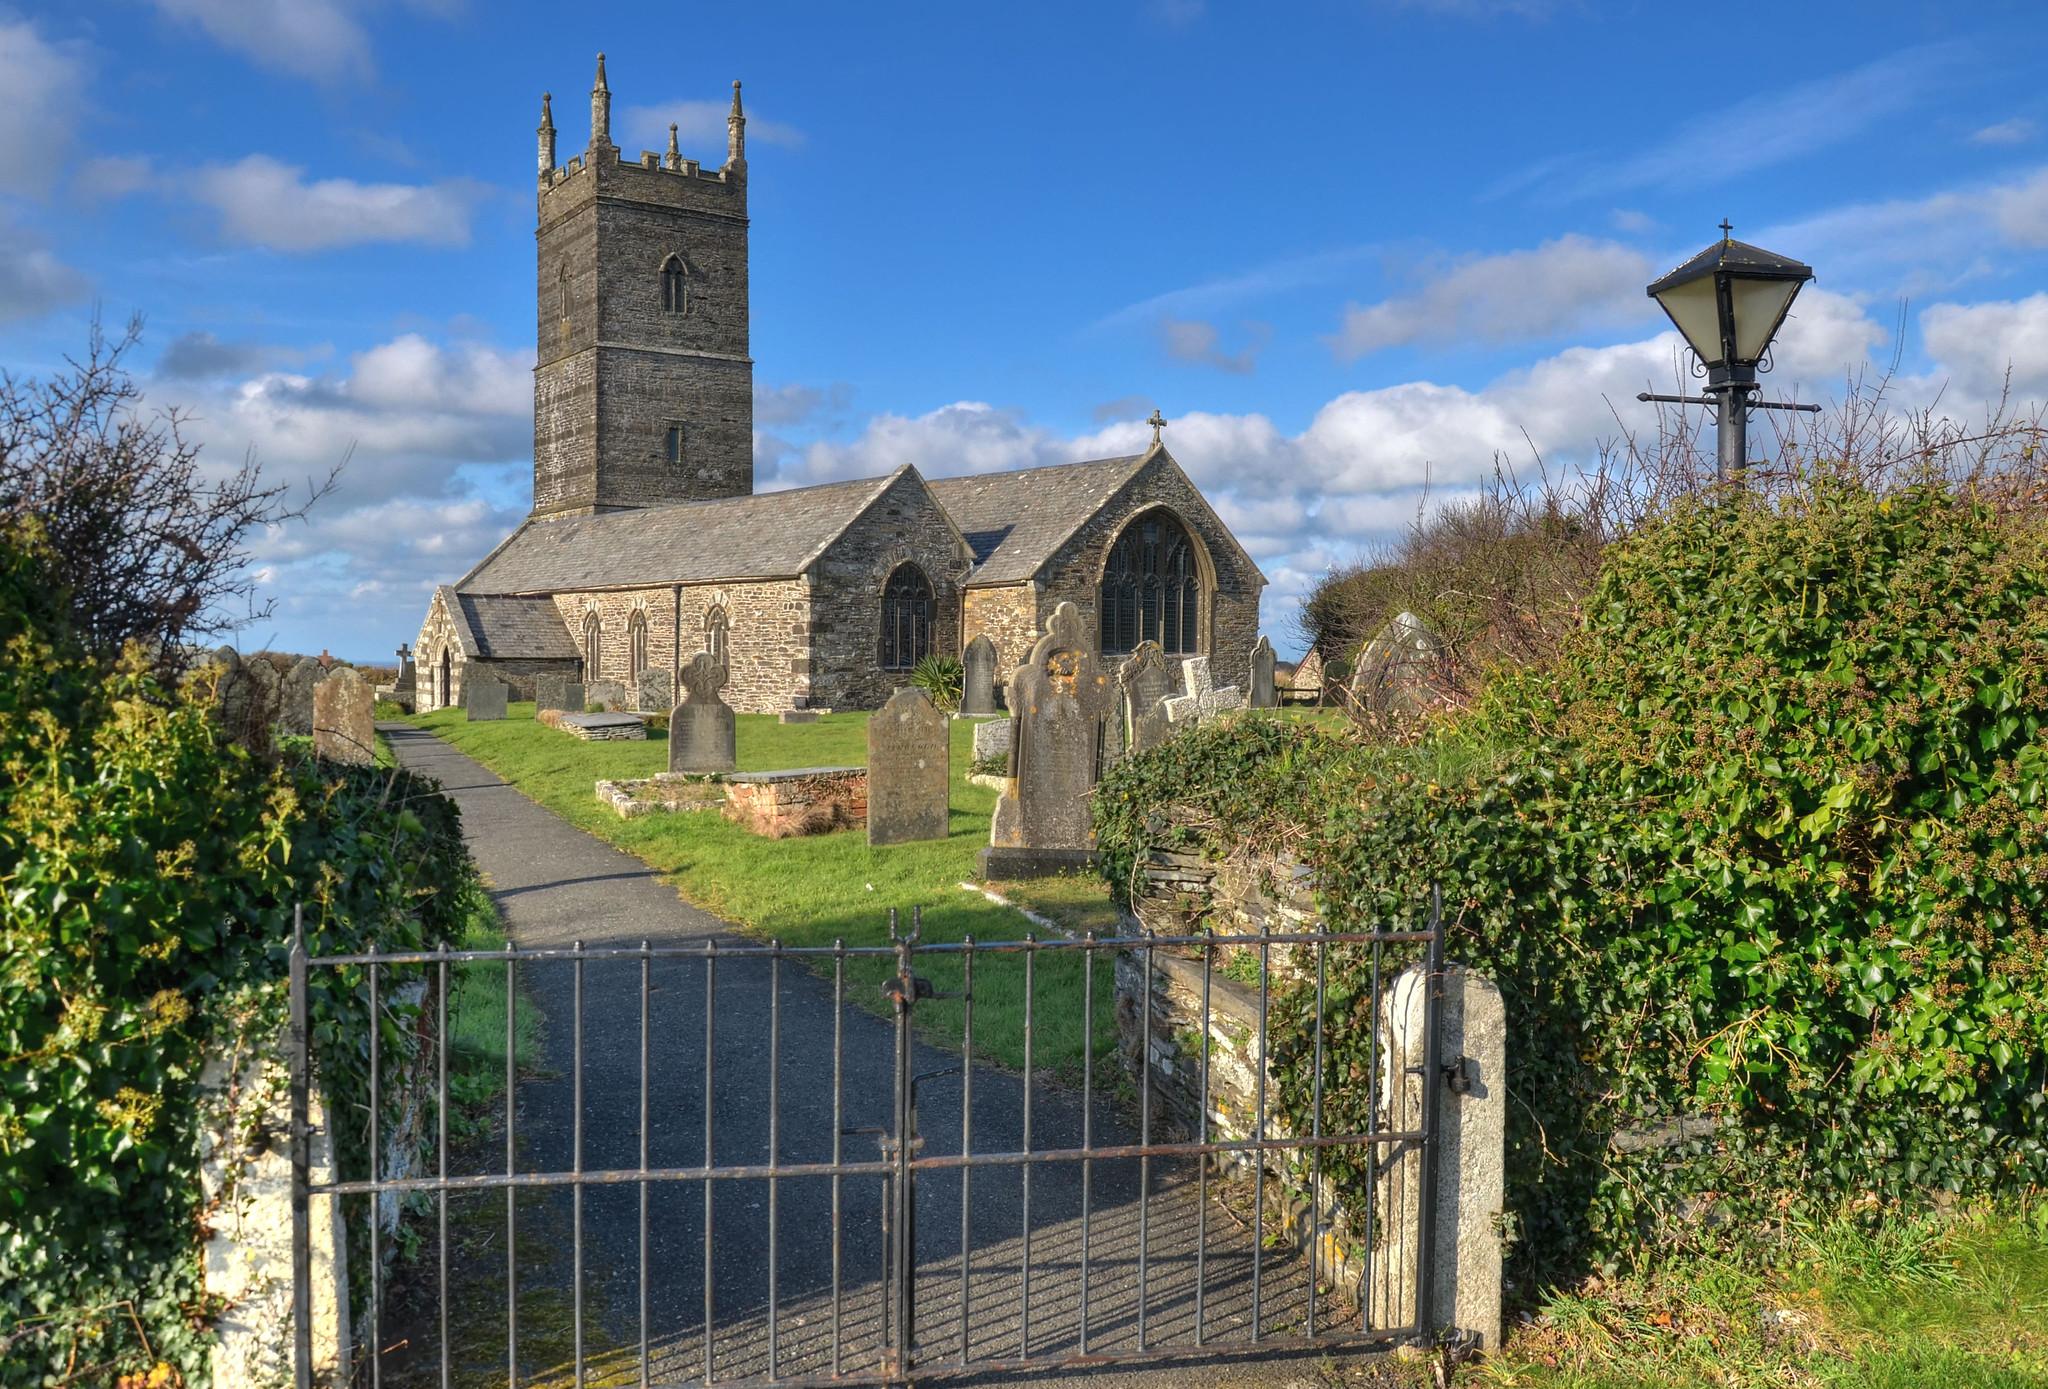 Another Pic of St Eval Parish Church